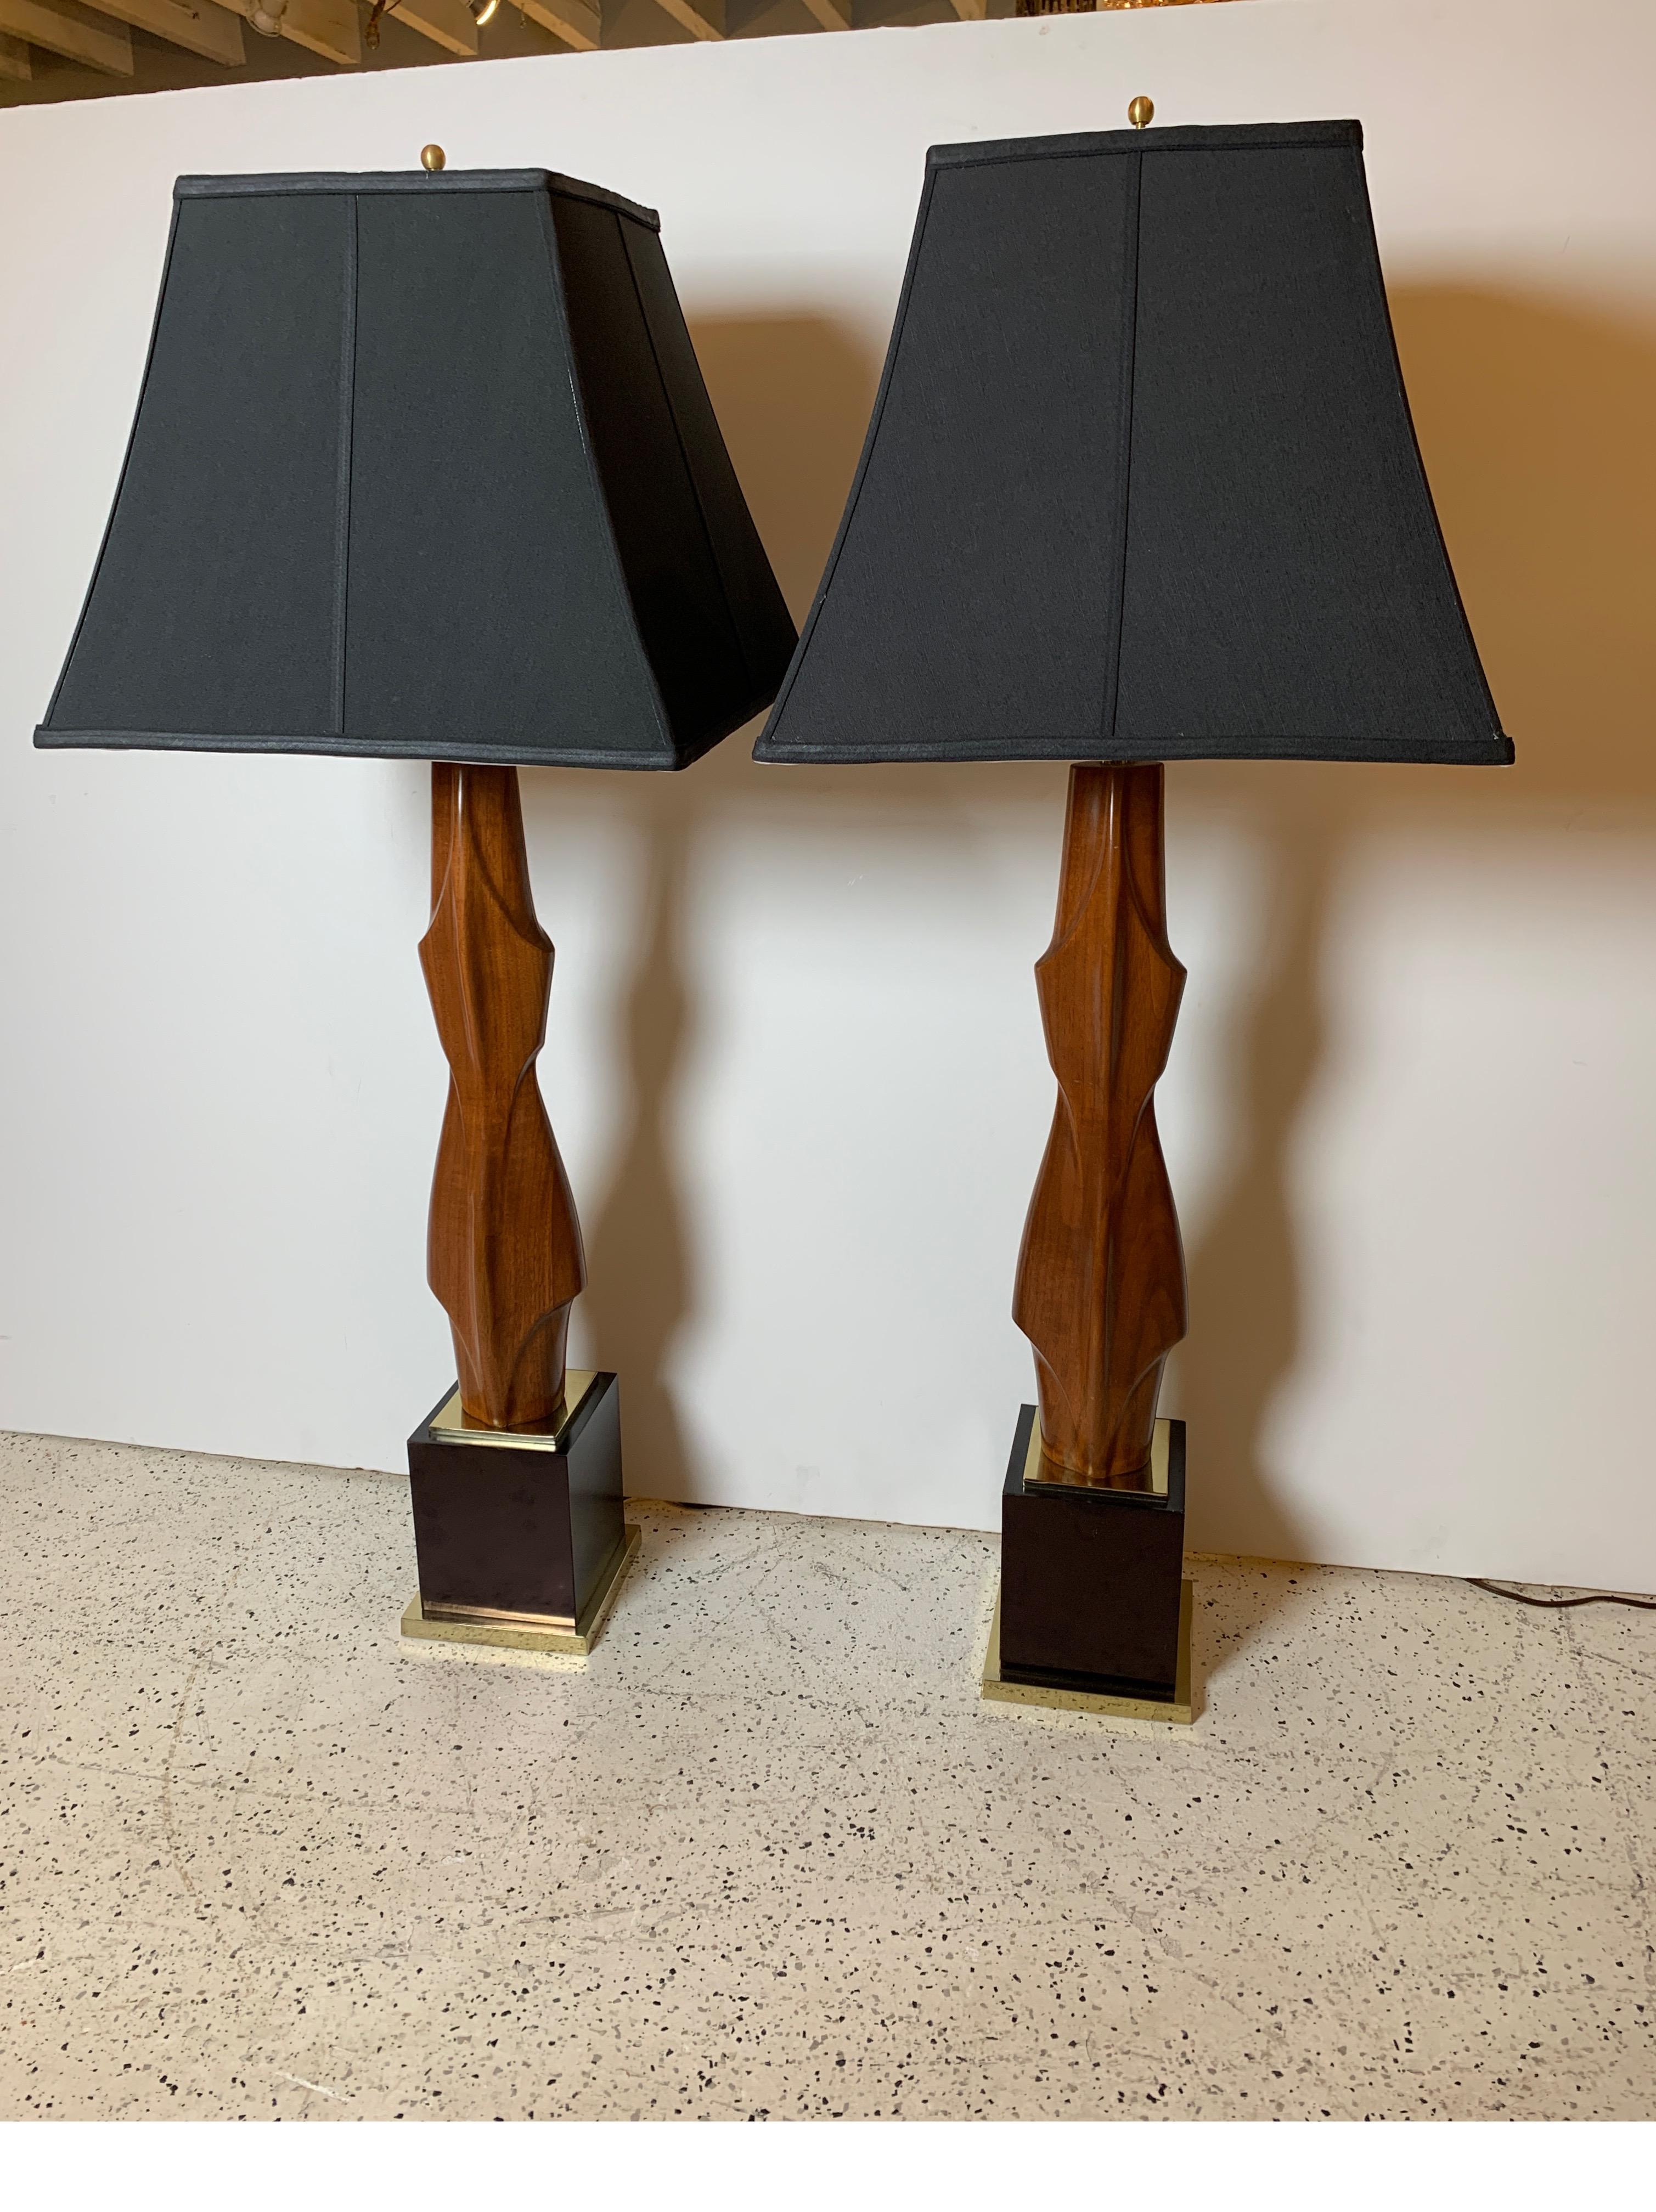 A pair of midcentury mahogany lamps by Laurel Lamp as featured in Don Draper's (Mad men) office. Arresting sculptural form that satisfies both art and lighting needs, late 1950s. The shades are for photographic purposes and not included with the